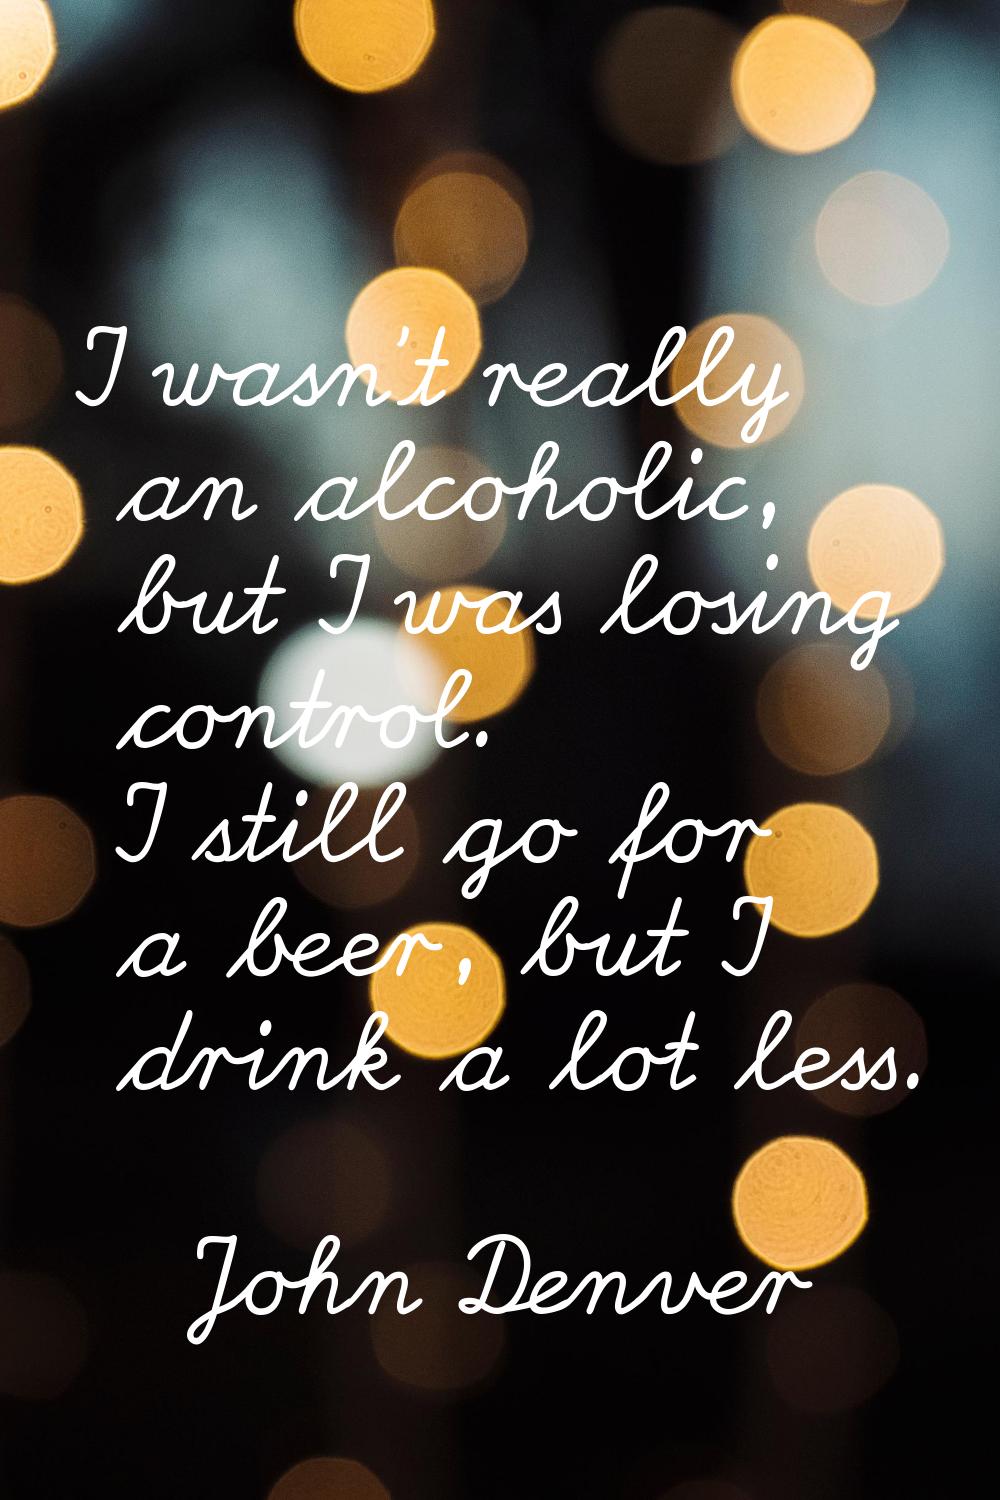 I wasn't really an alcoholic, but I was losing control. I still go for a beer, but I drink a lot le